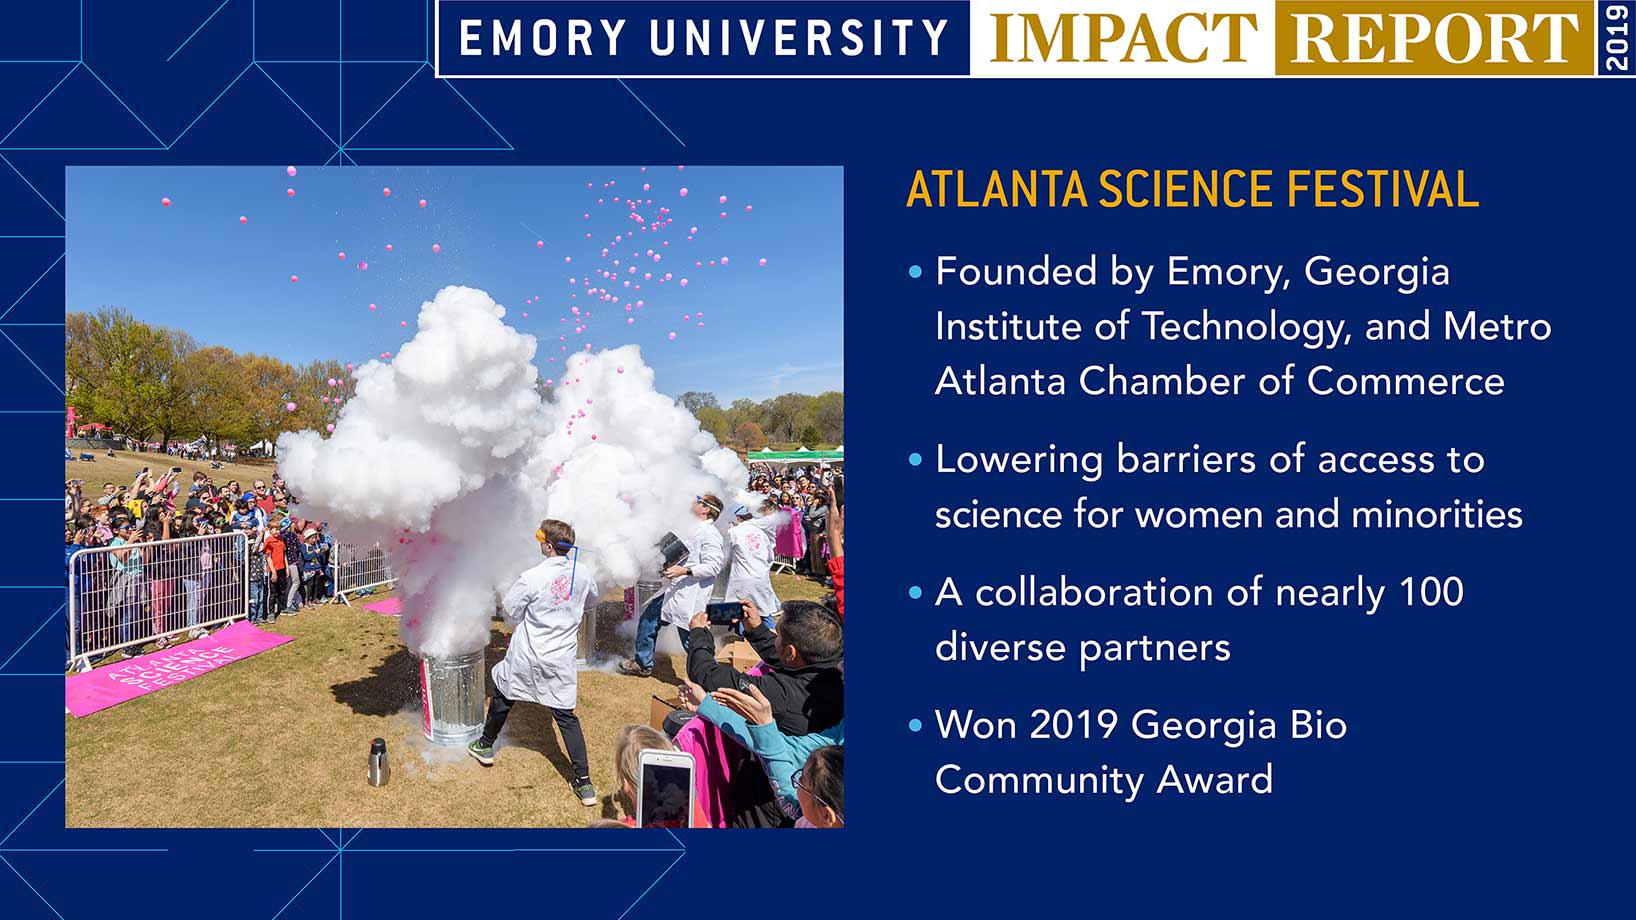 Atlanta Science Festival: Founded by Emory, Georgia Institute of Technology, and Metro Atlanta Chamber of Commerce; Lowering barriers of access to science for women and minorities; A collaboration of nearly 100 diverse partners; Won 2019 Georgia Bio Community Award